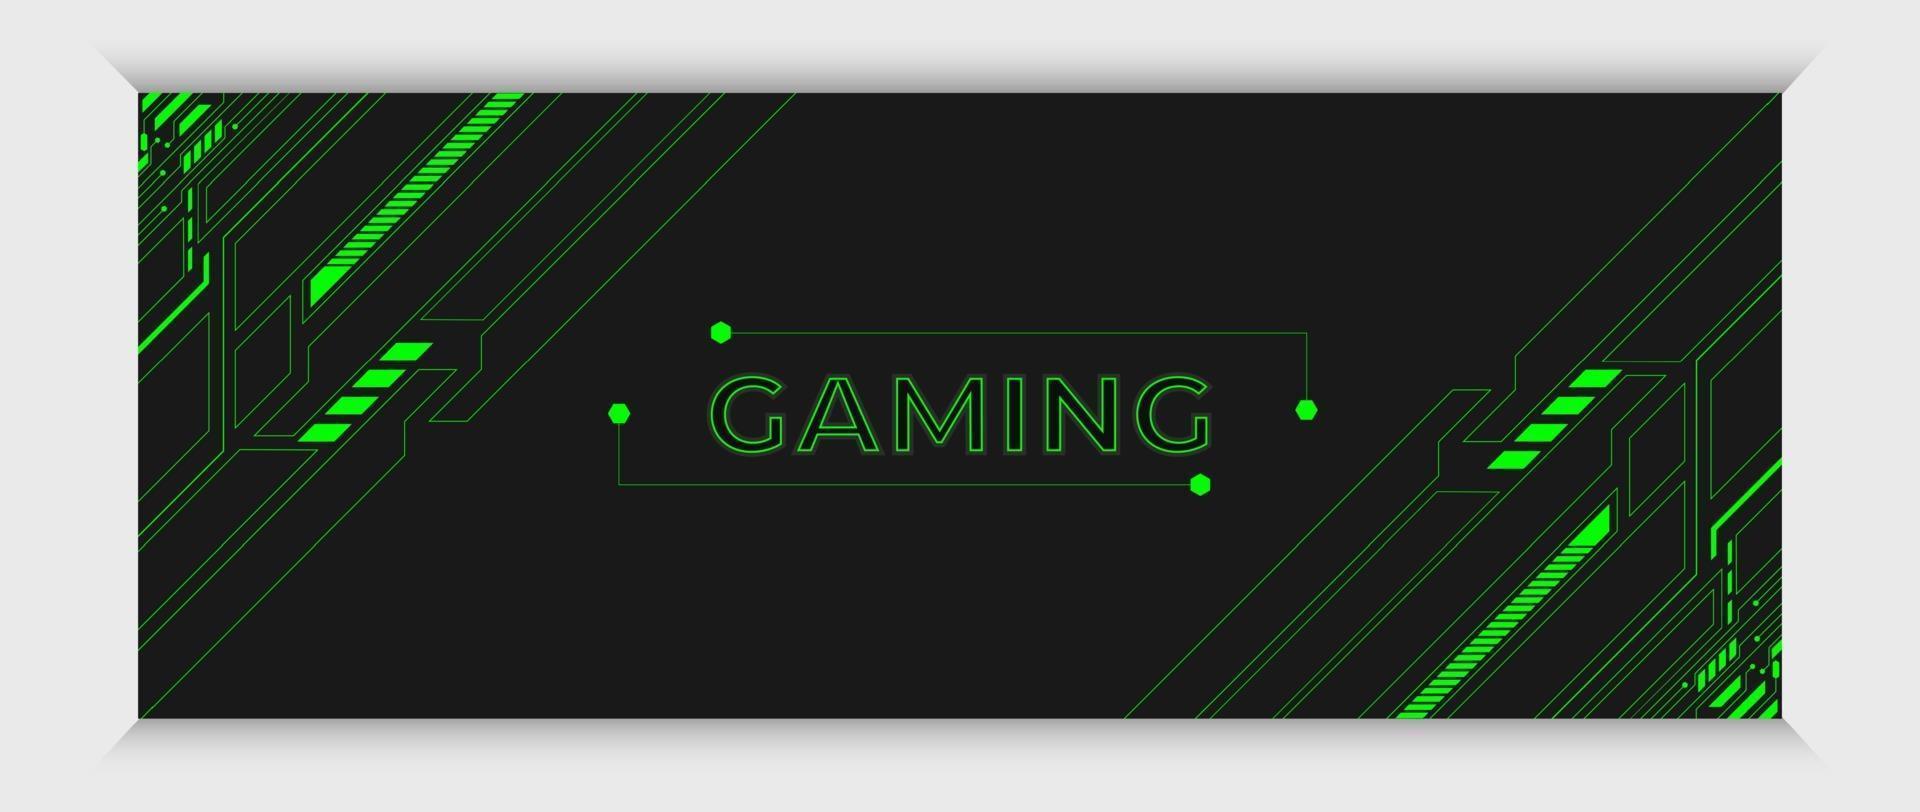 futuristic green and black gaming banner and cover design template vector